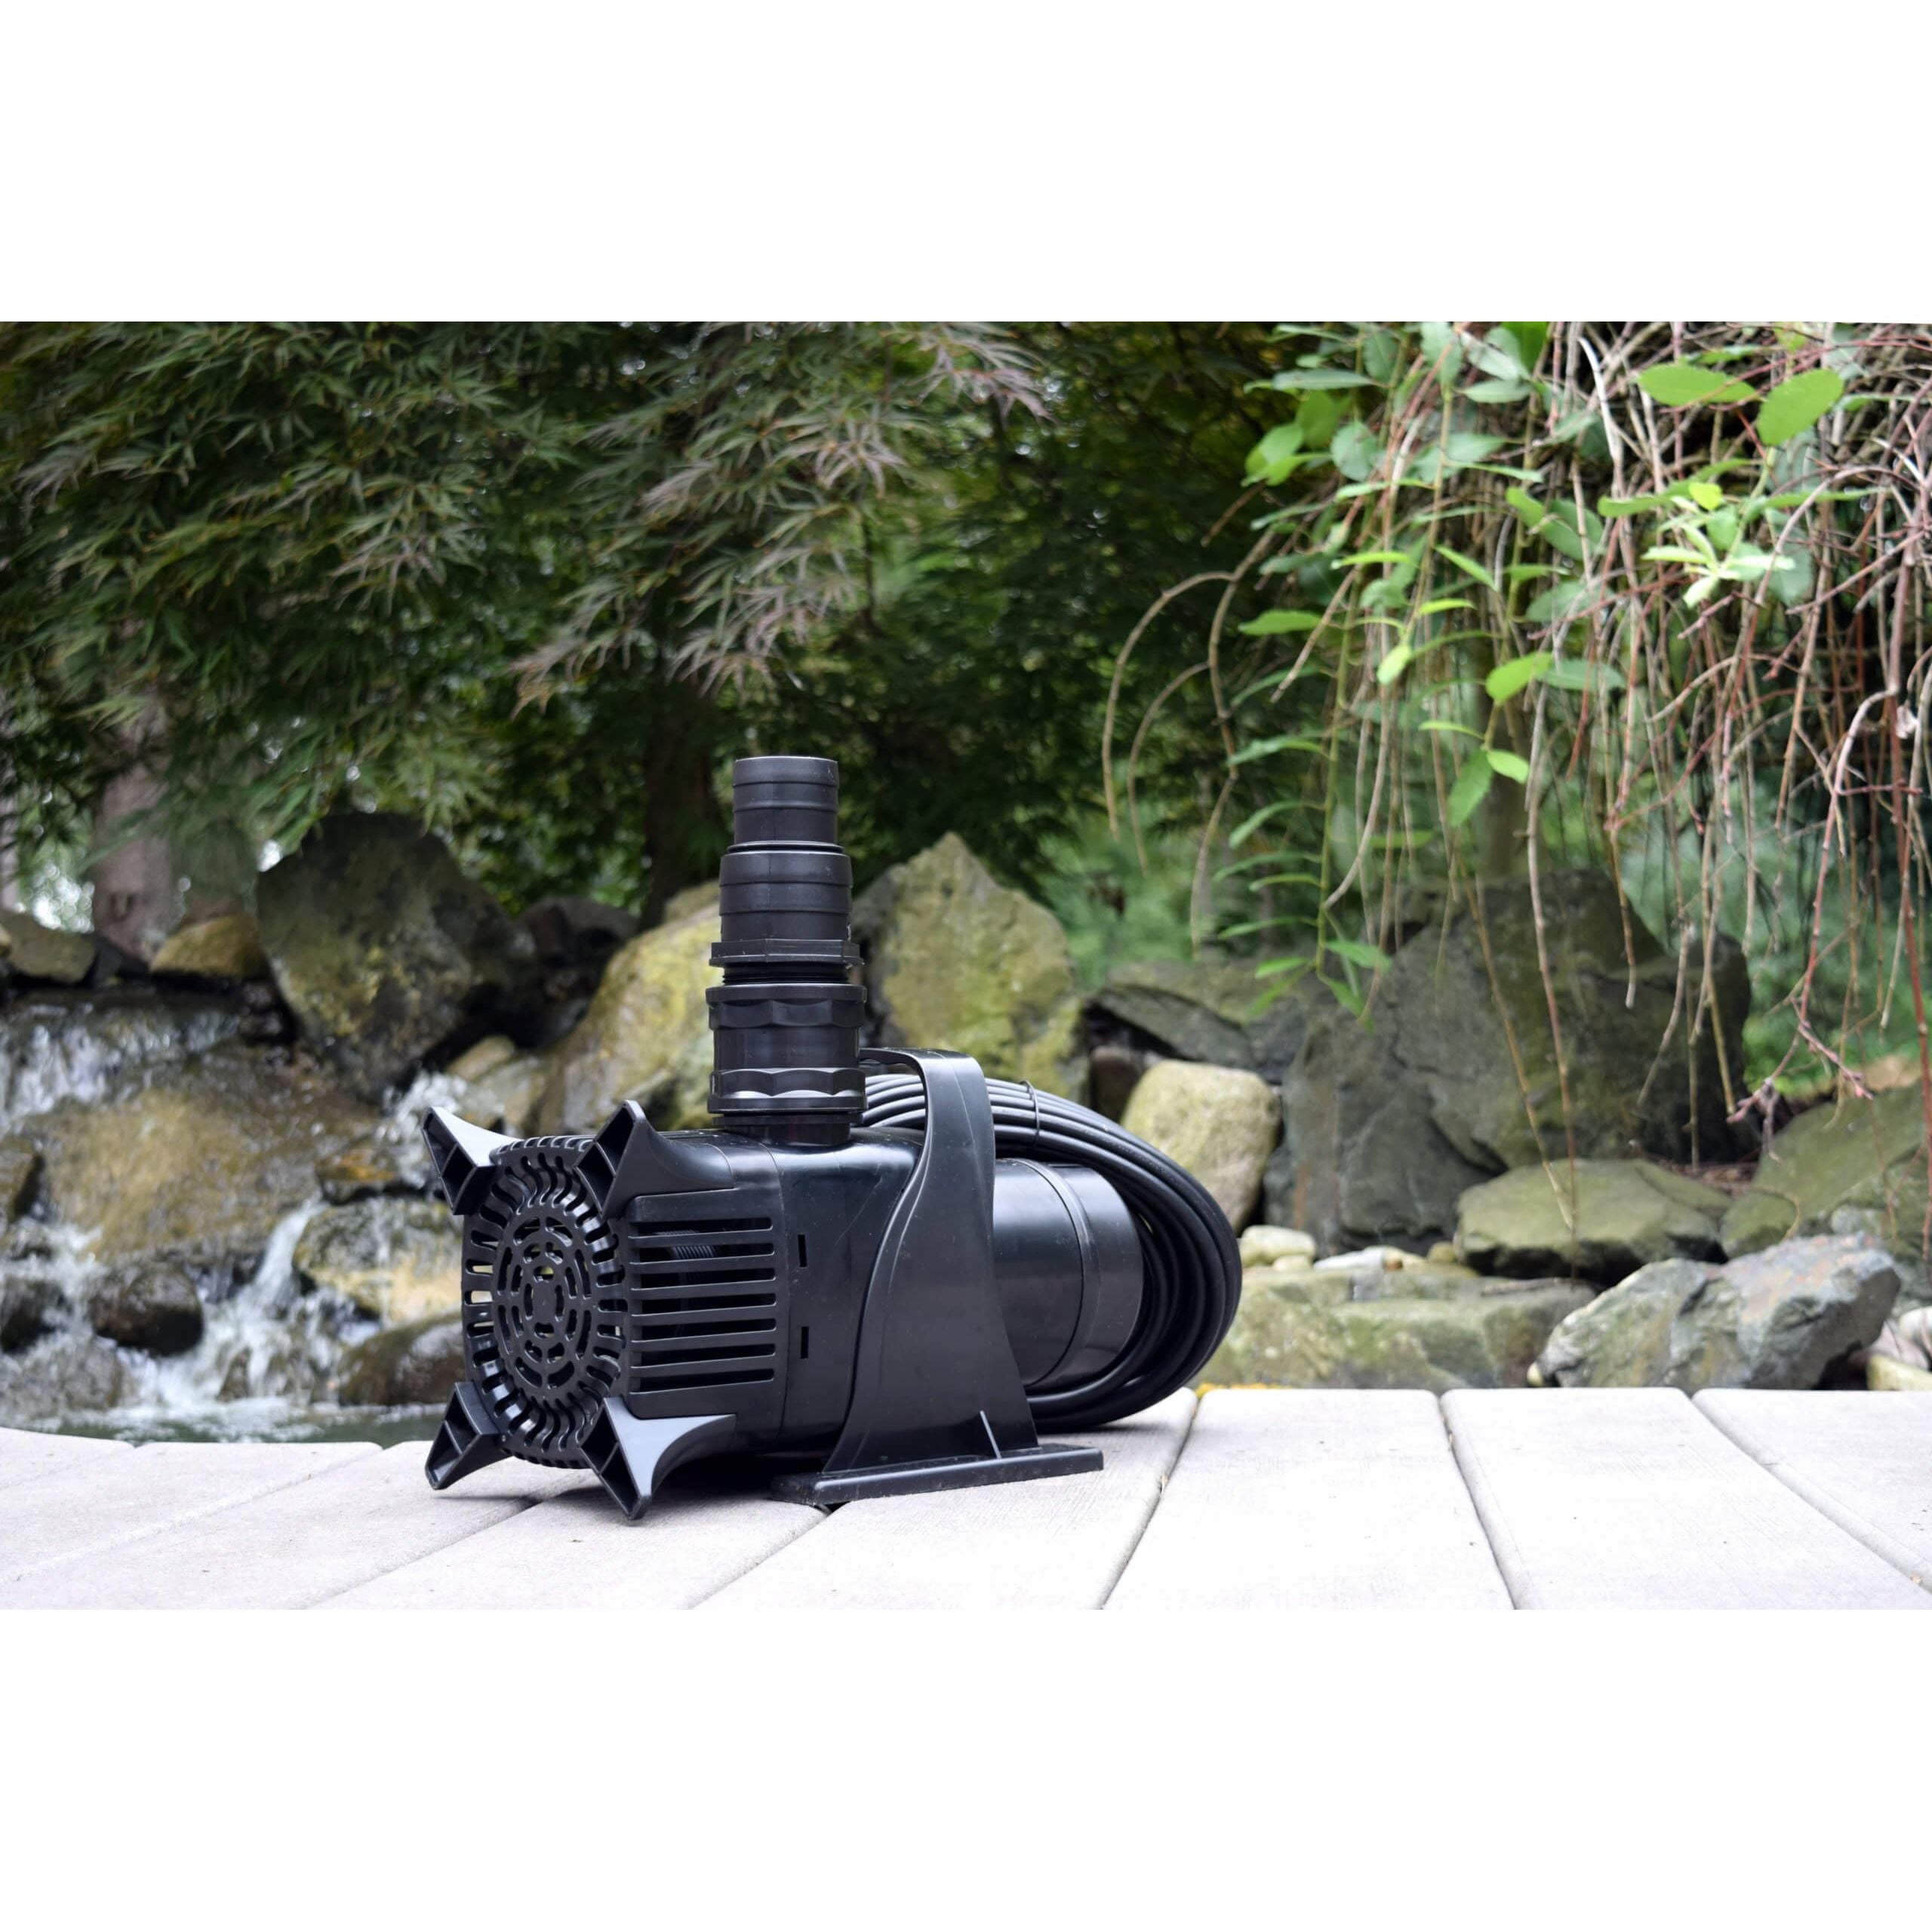 Easy Pro EPA Series Asynchronous Submersible Mag Drive Pumps - American Pond Supplies Easy Pro 5360 gph Mag Drive Pumps Mag Drive Pumps